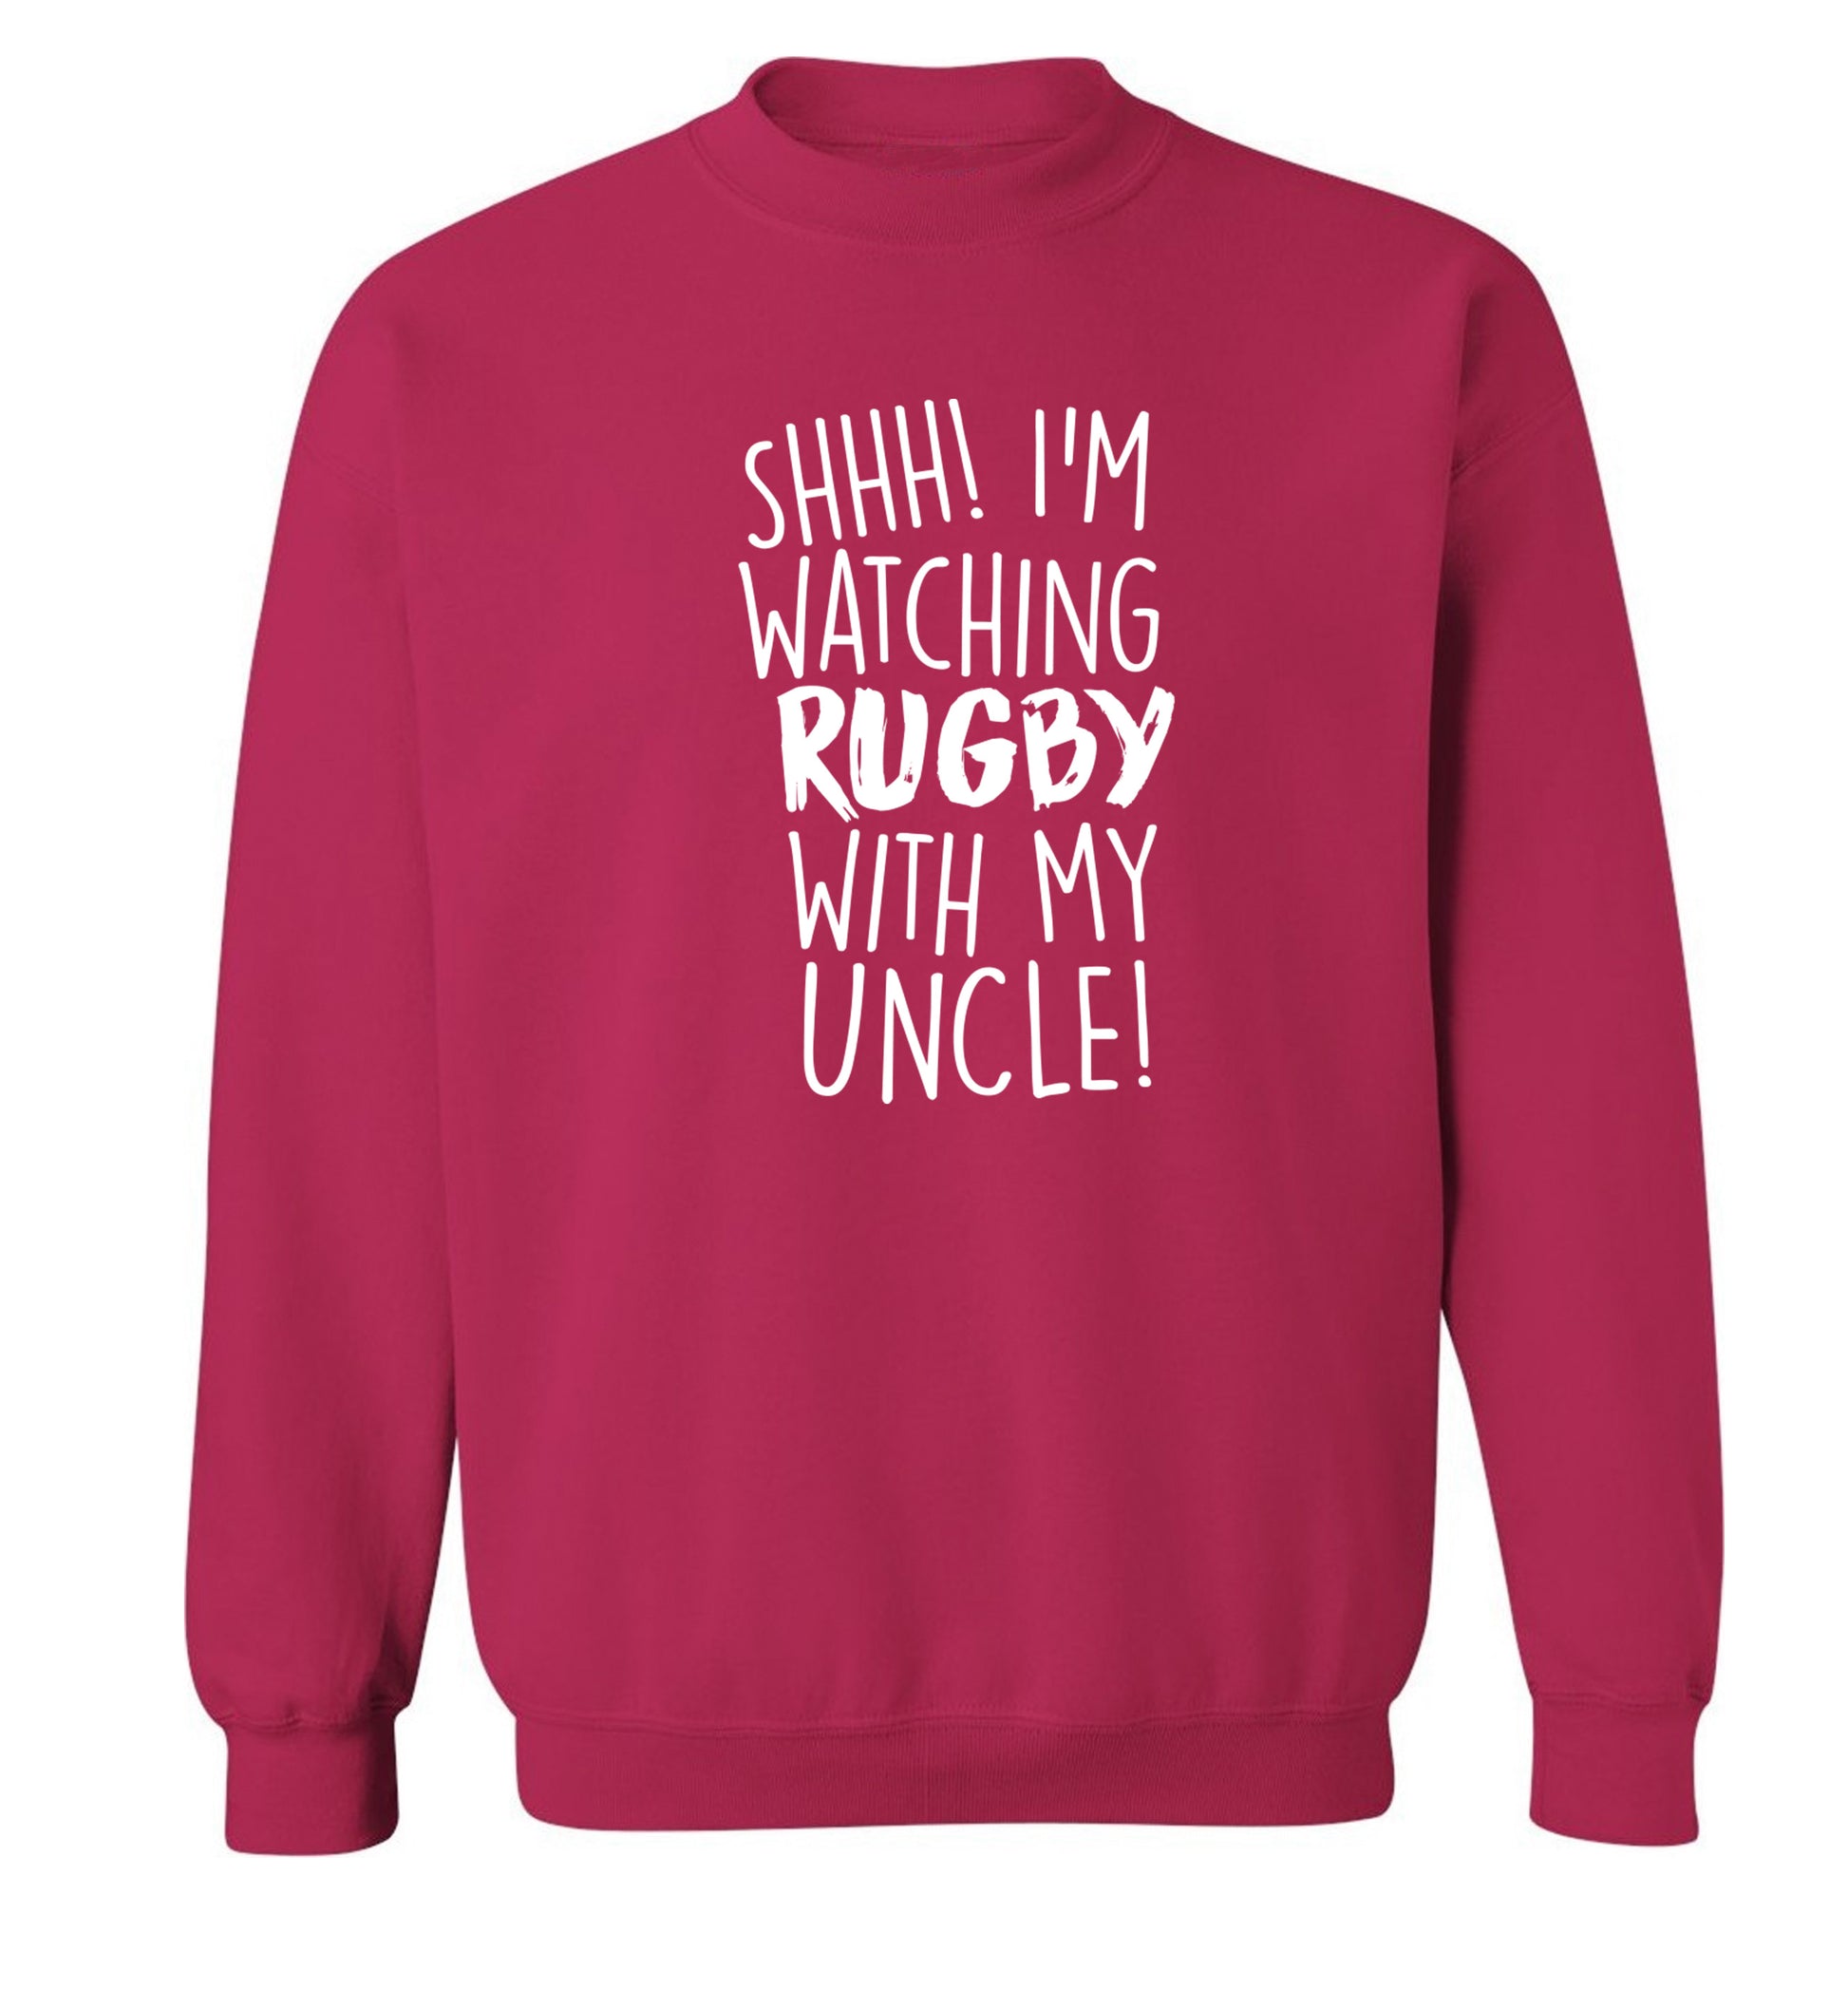 Shh.. I'm watching rugby with my uncle Adult's unisex pink Sweater 2XL